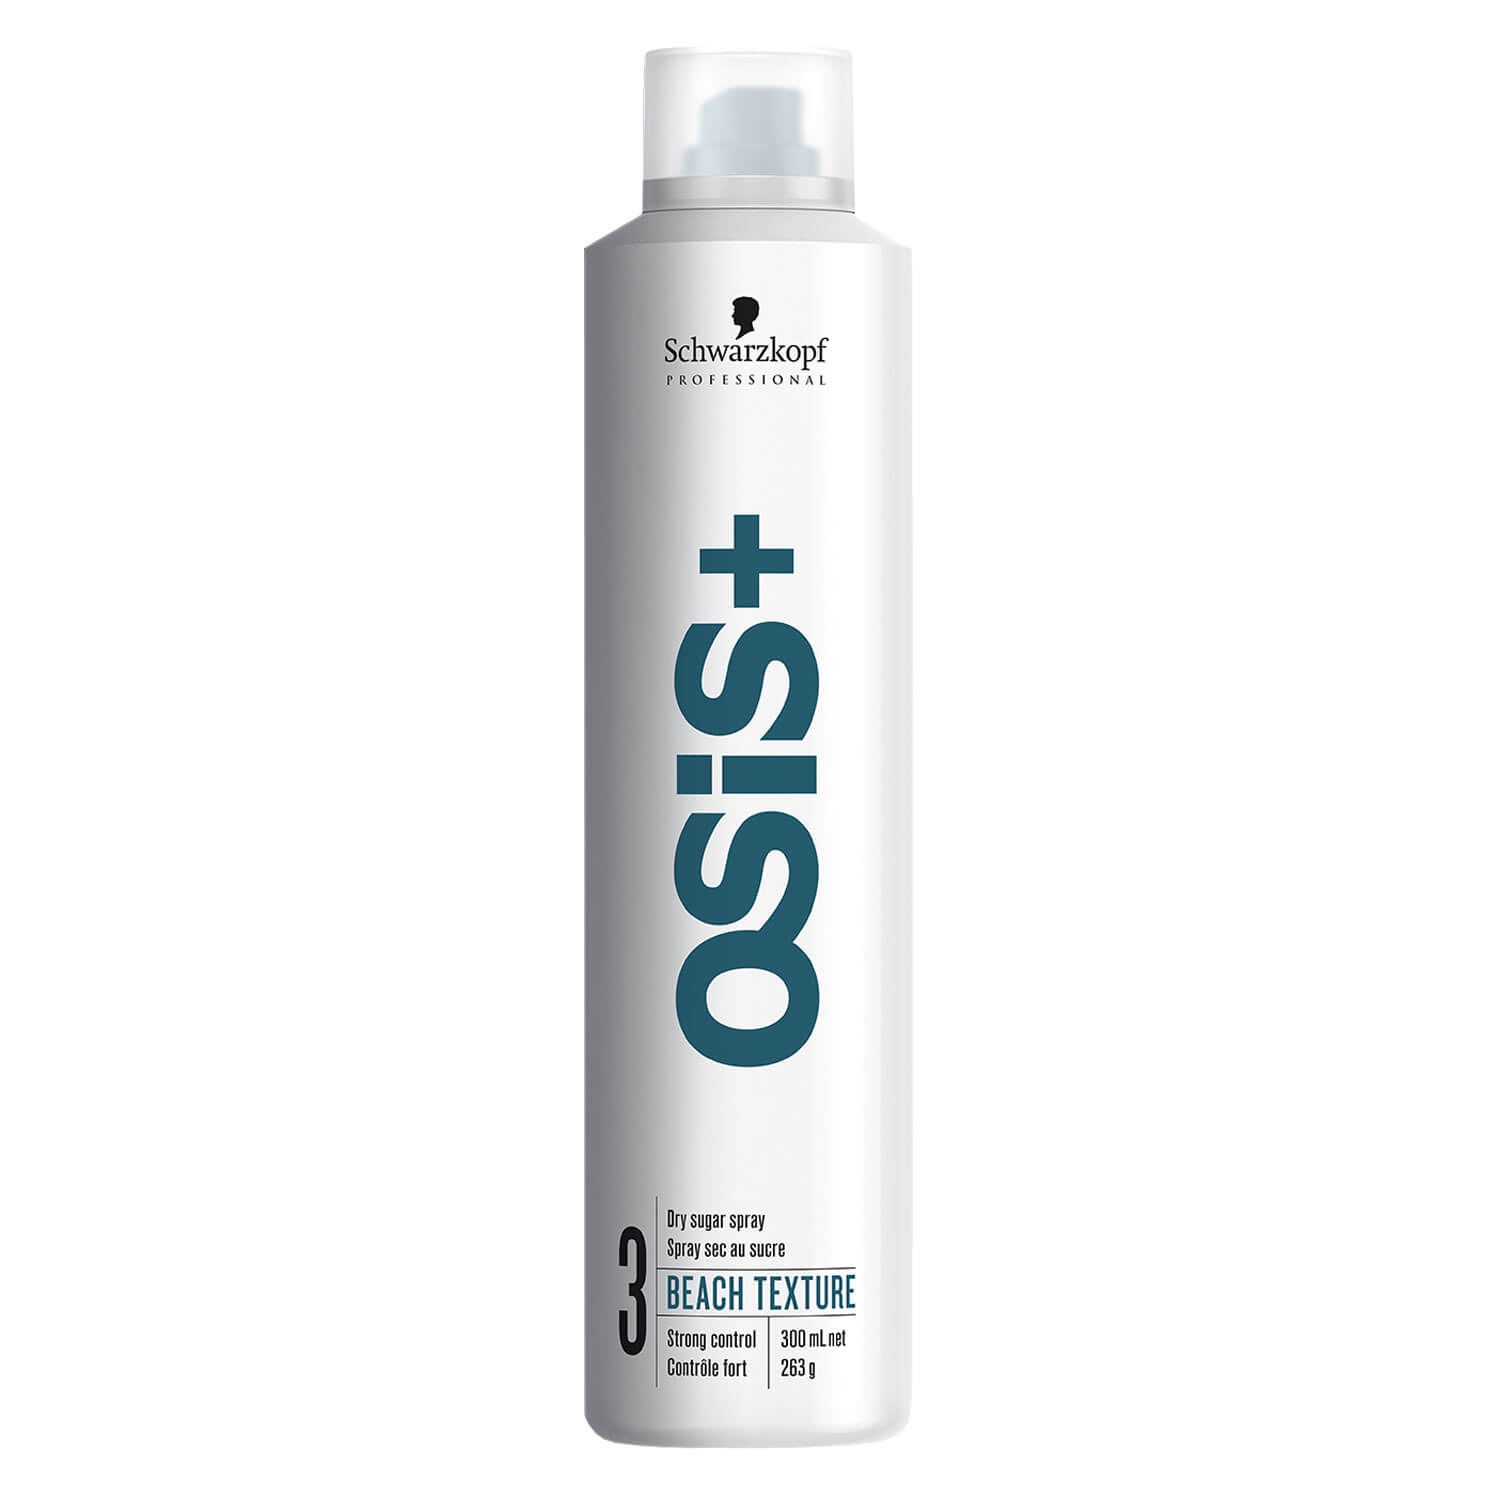 Product image from Osis - Long Hair Dry Sugar Spray Beach Texture